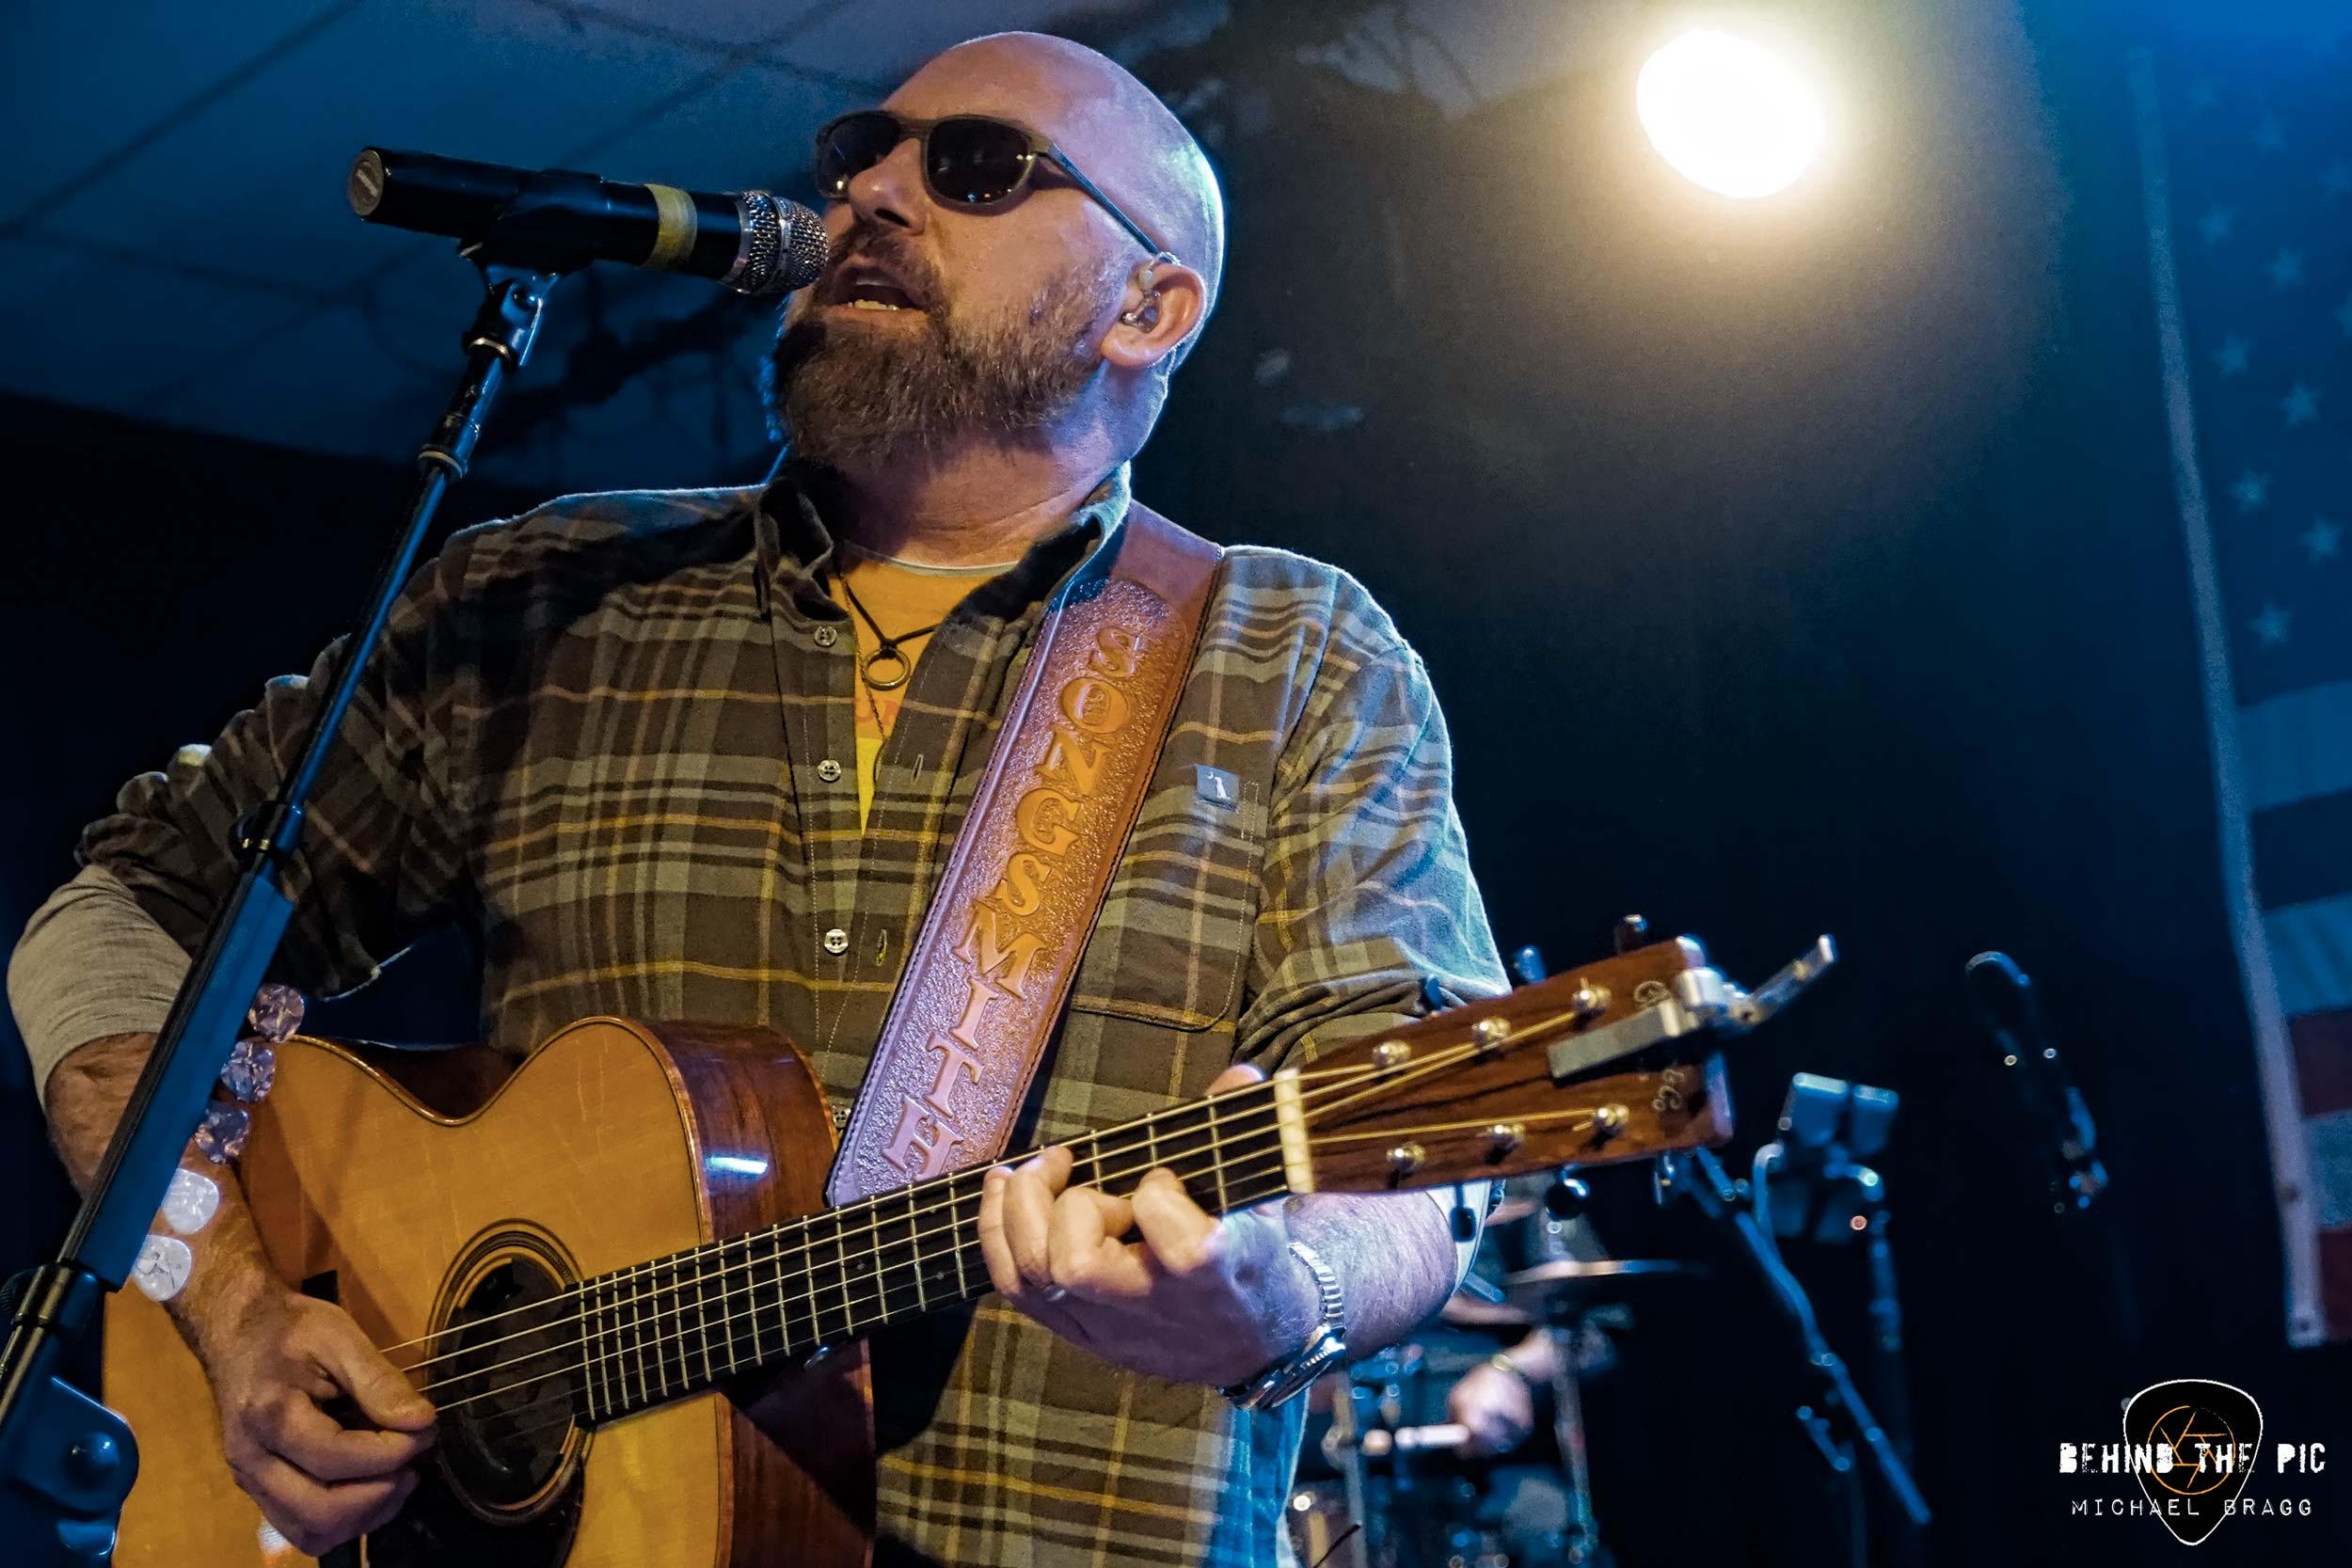 Corey Smith at The Blind Horse Saloon Behind The Pic 2500x1670